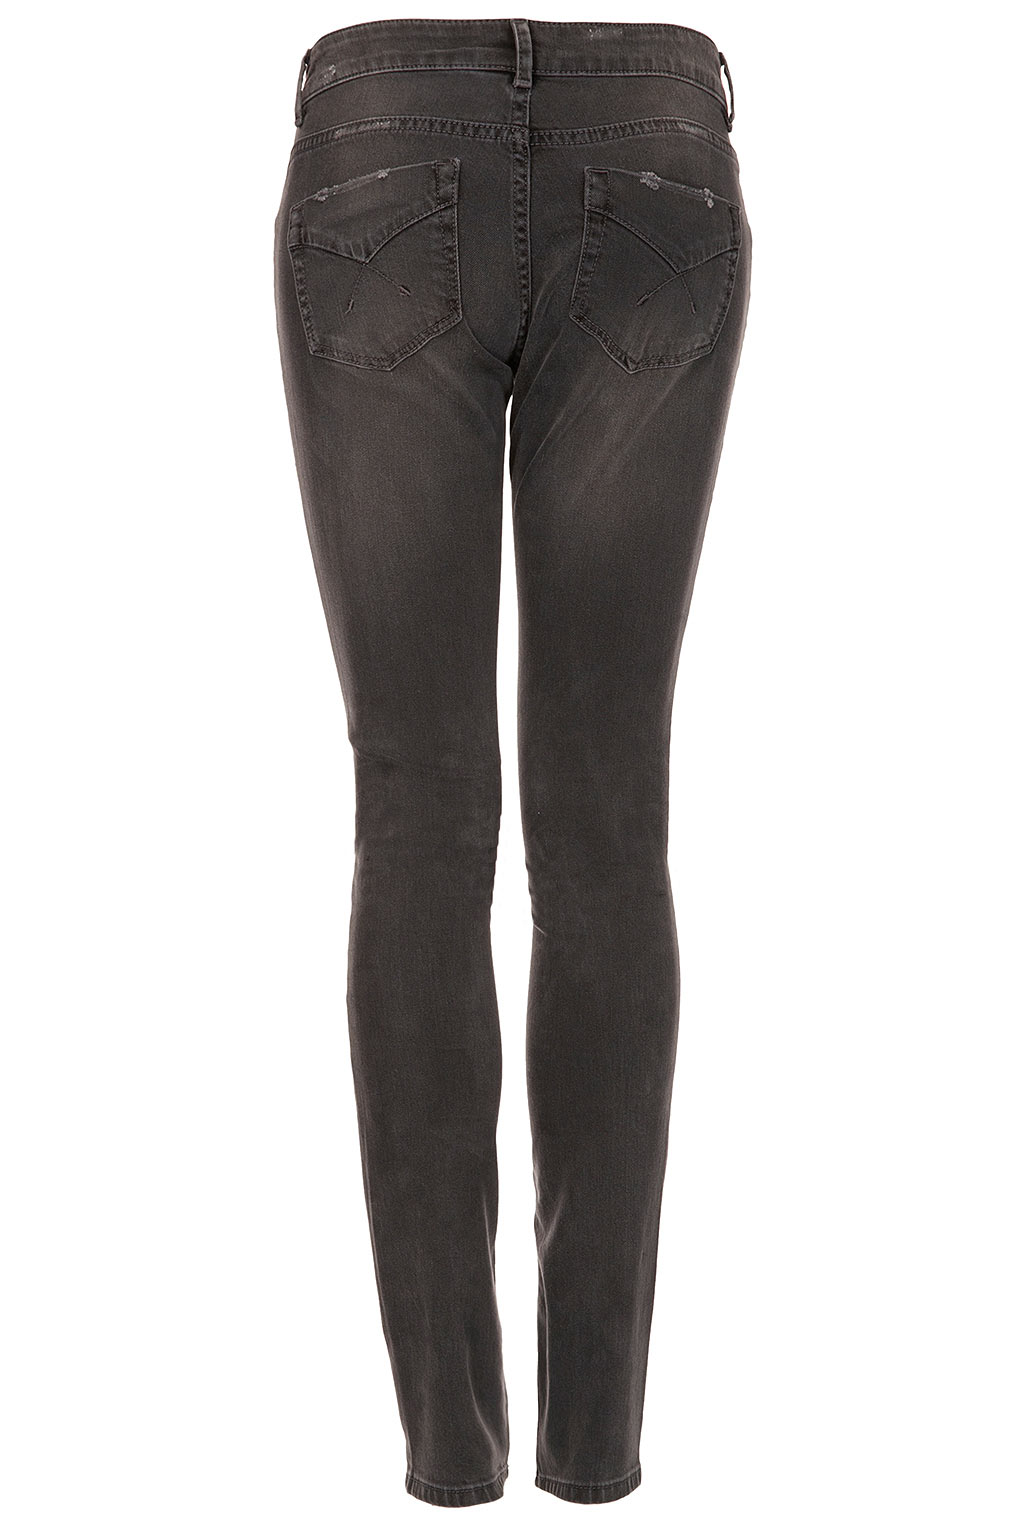 TOPSHOP Moto Grey Baxter Jeans in Gray - Lyst